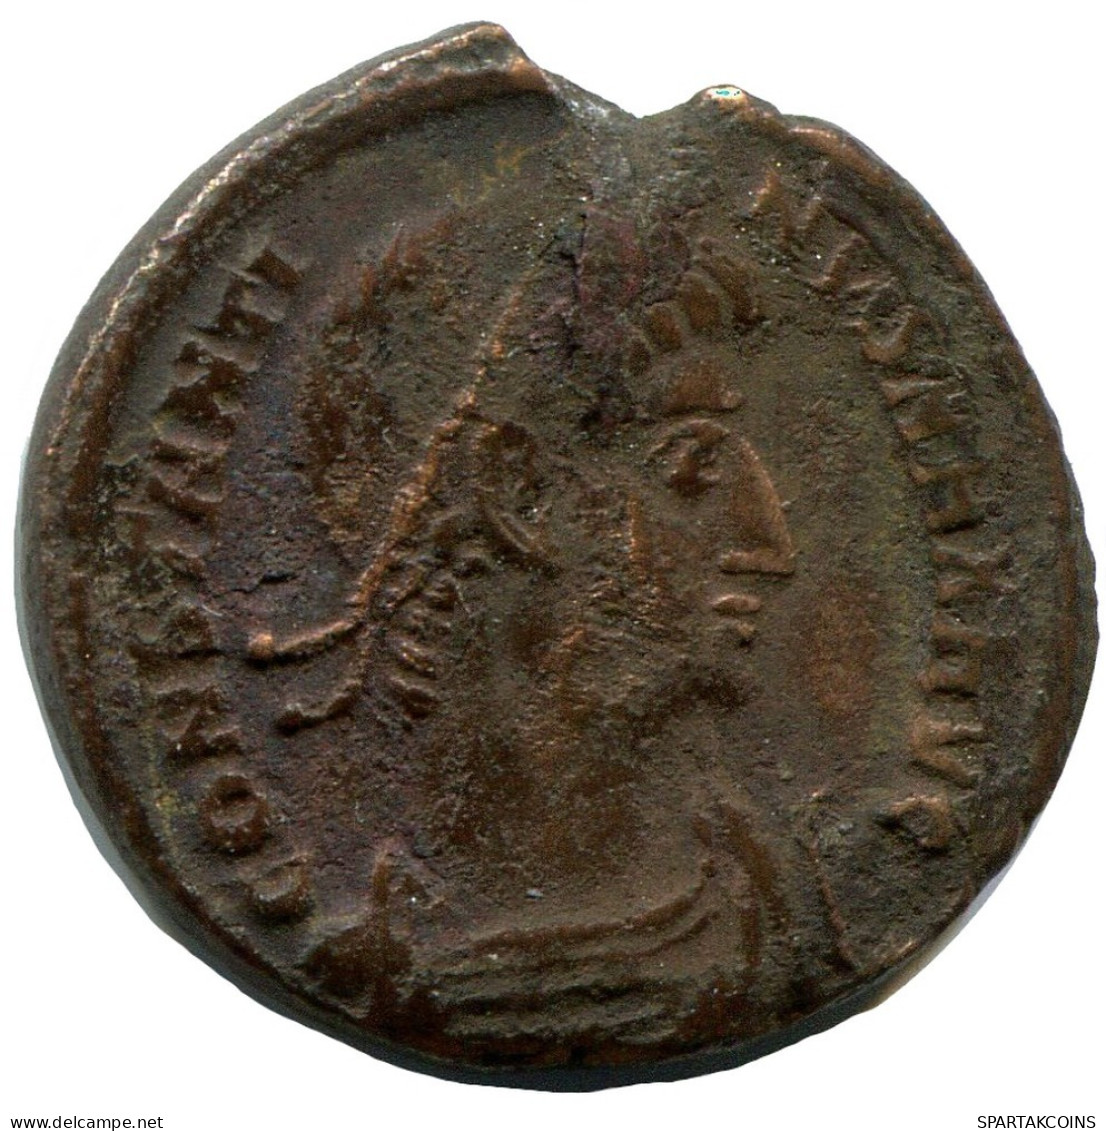 CONSTANTINE I MINTED IN NICOMEDIA FROM THE ROYAL ONTARIO MUSEUM #ANC10895.14.F.A - El Imperio Christiano (307 / 363)